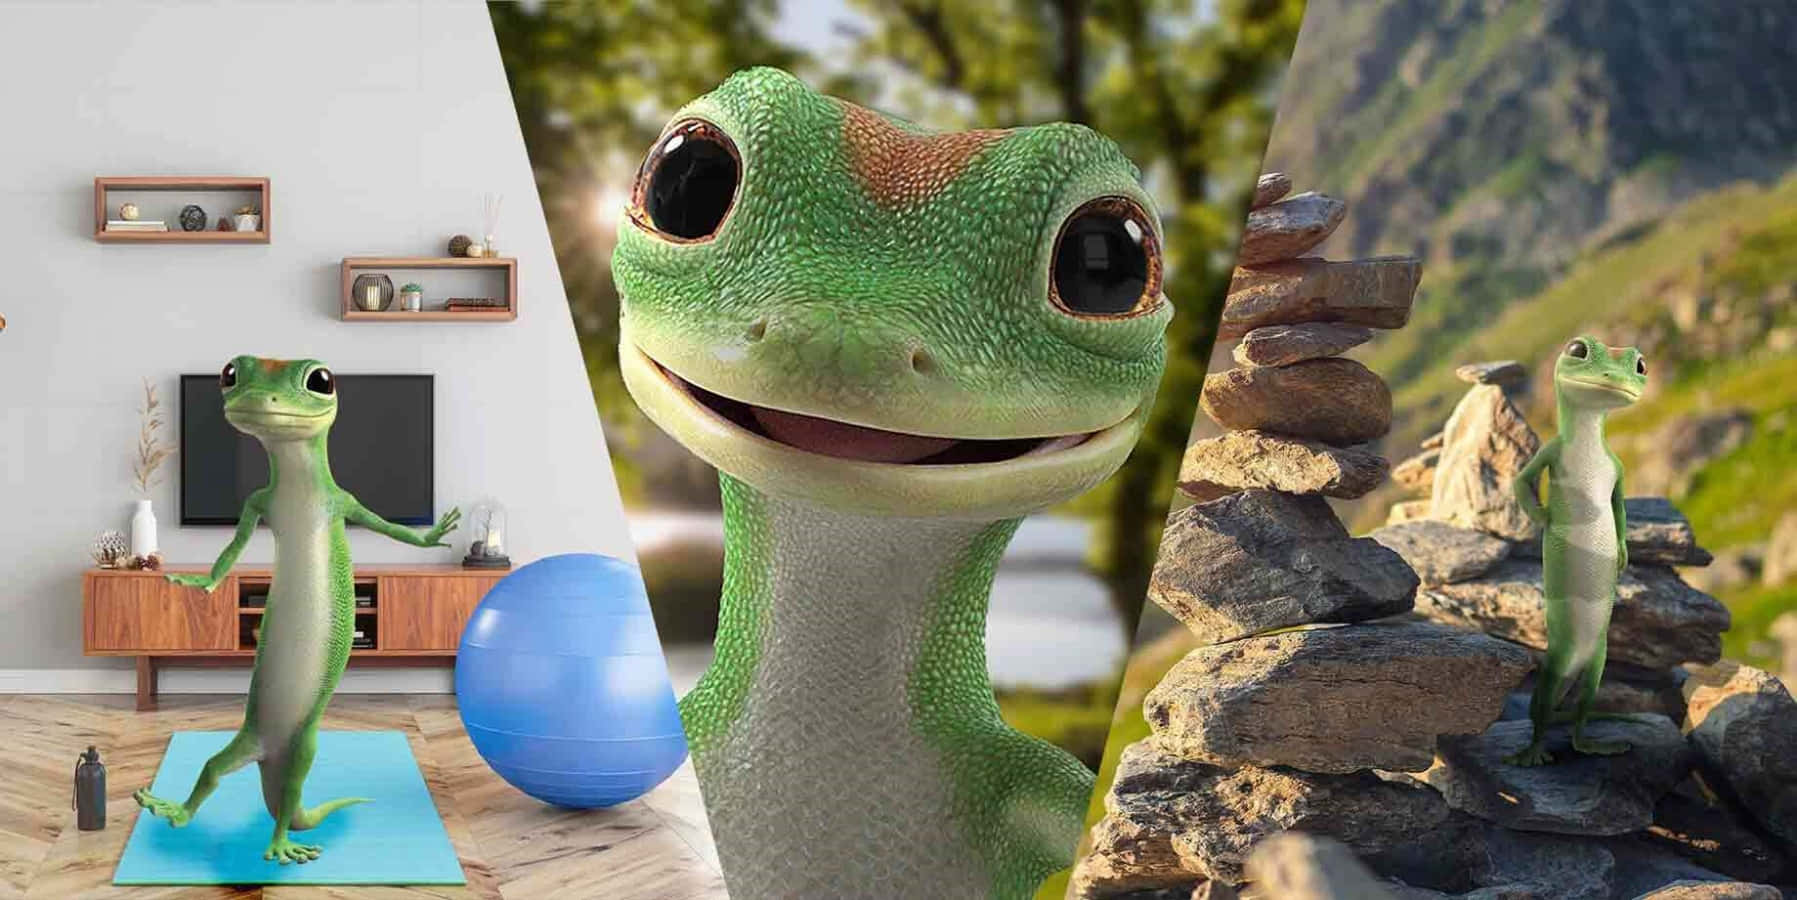 Get peace of mind knowing you're protected with Geico